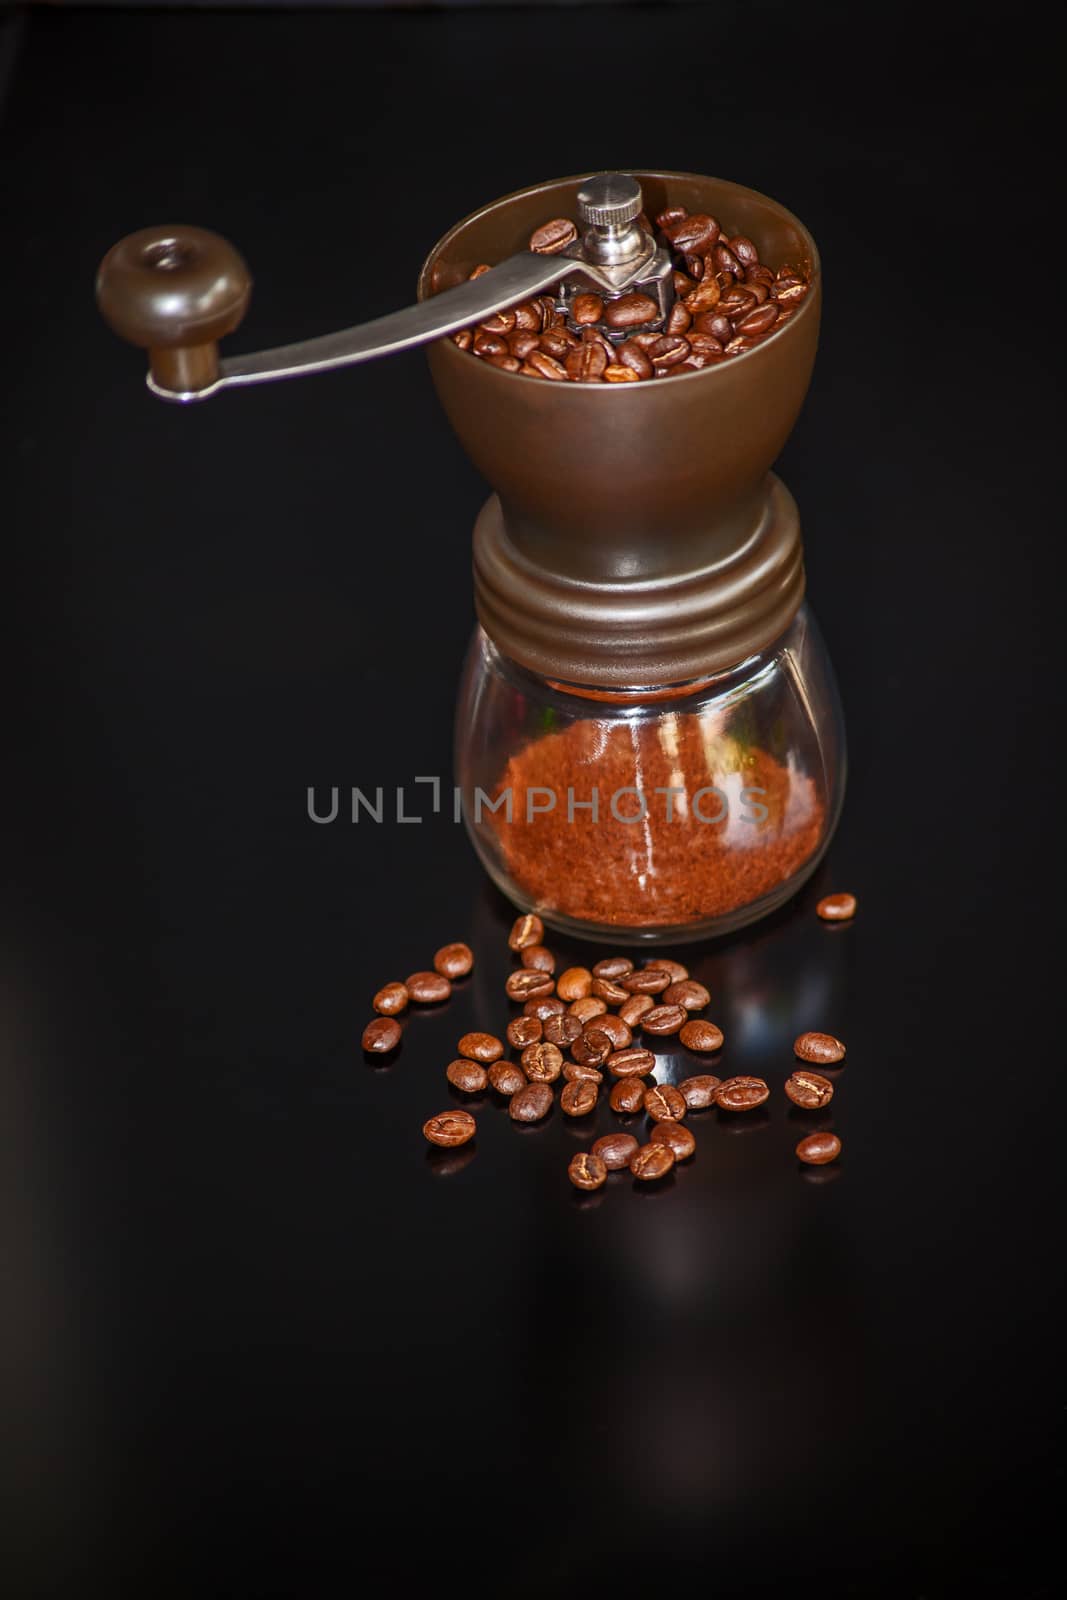 Hand operated coffee grinder with roasted beans on a black background.